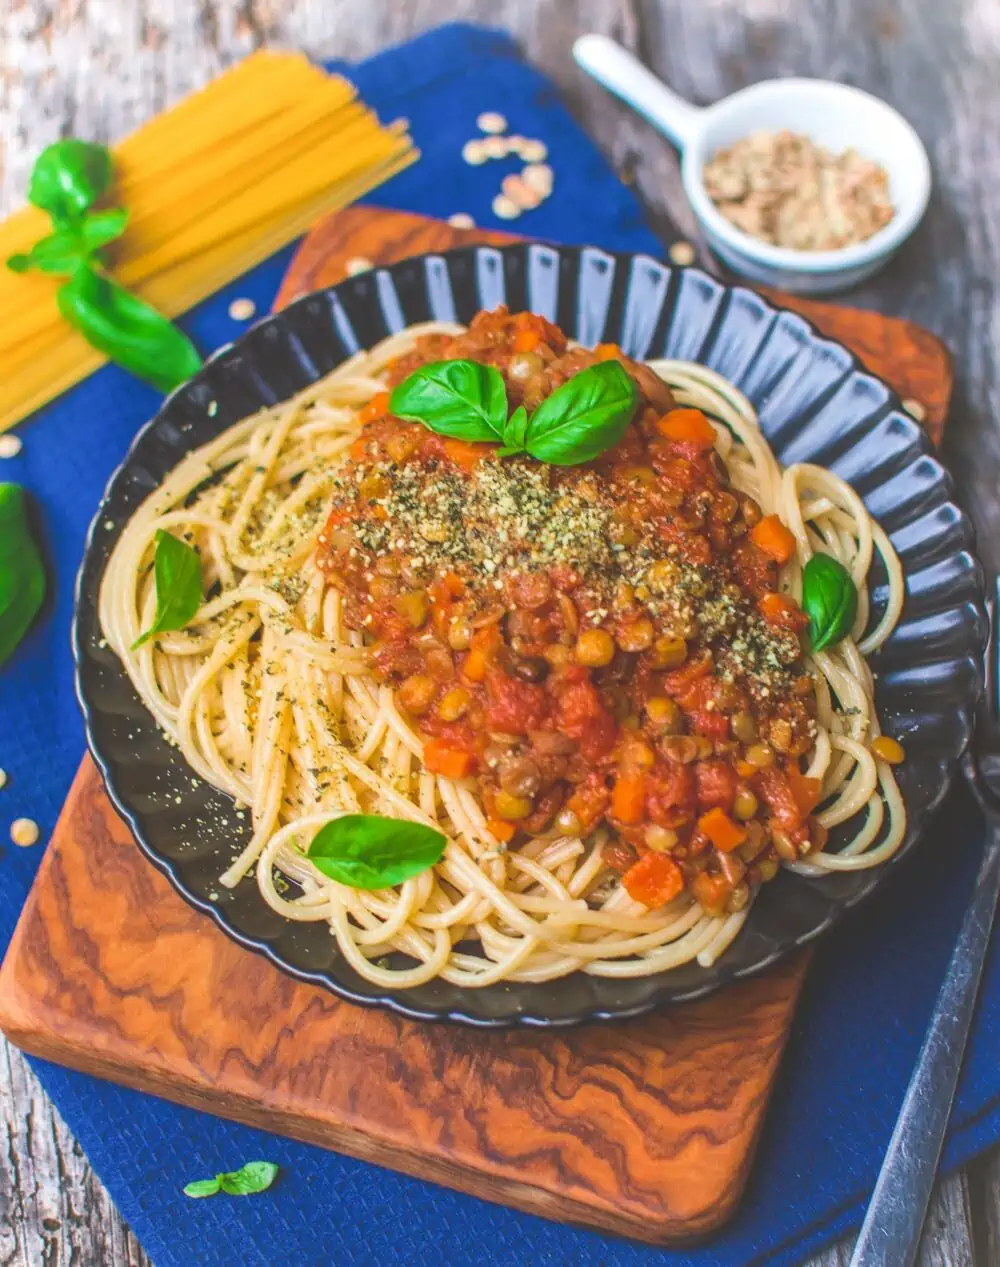 Vegan Lentil Bolognese Pasta with a Protein-Packed Sauce